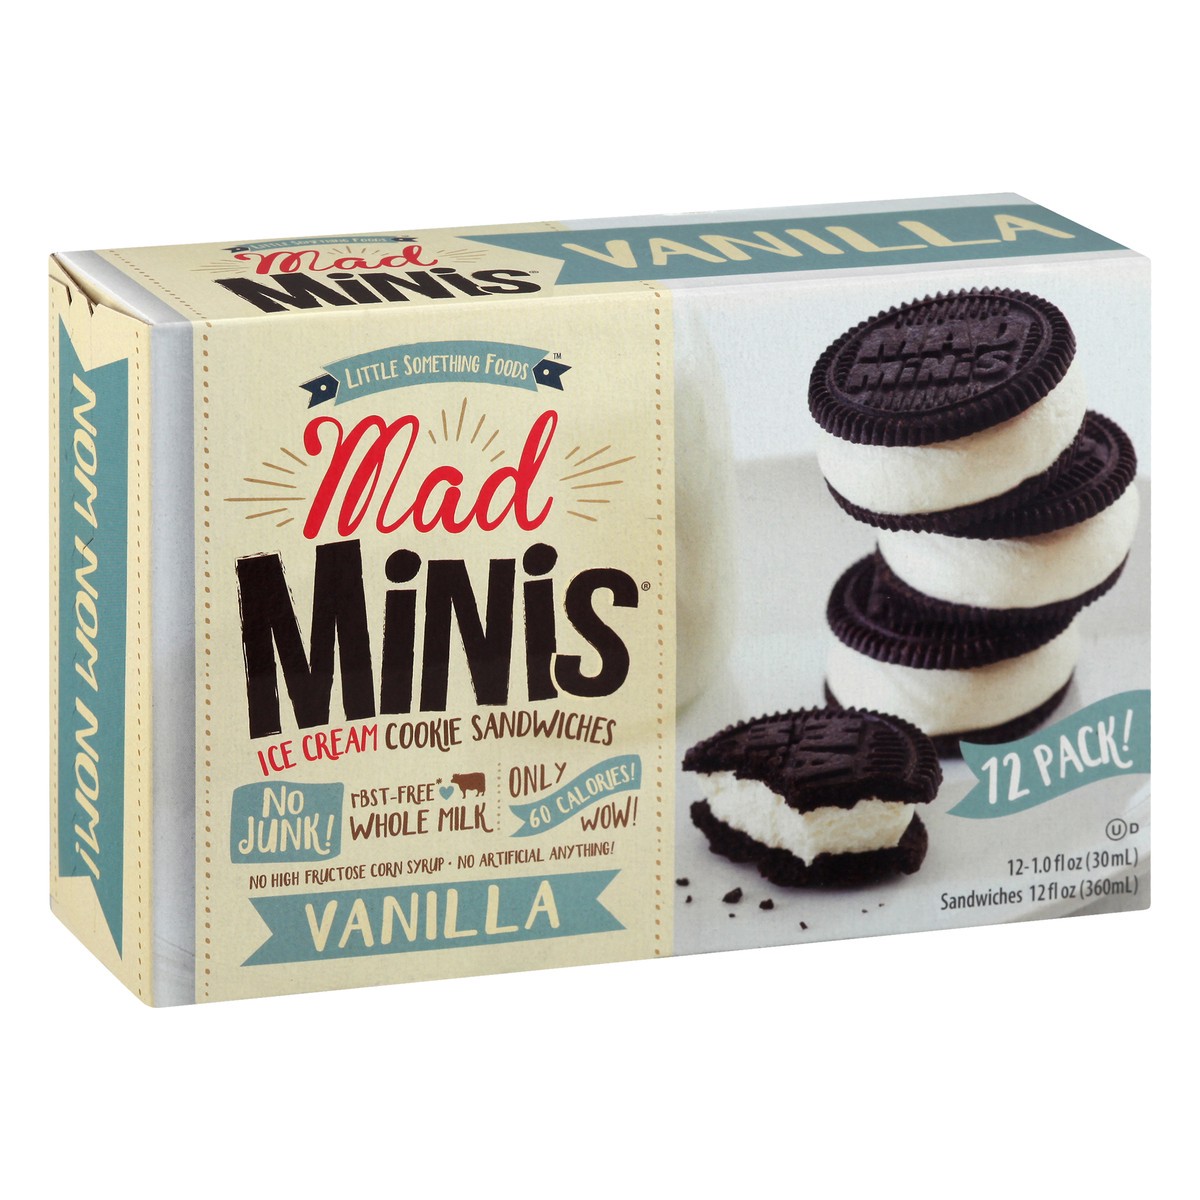 slide 2 of 9, Little Something Foods Mad Minis 12 Pack Vanilla Ice Cream Cookie Sandwiches 12 ea, 12 ct